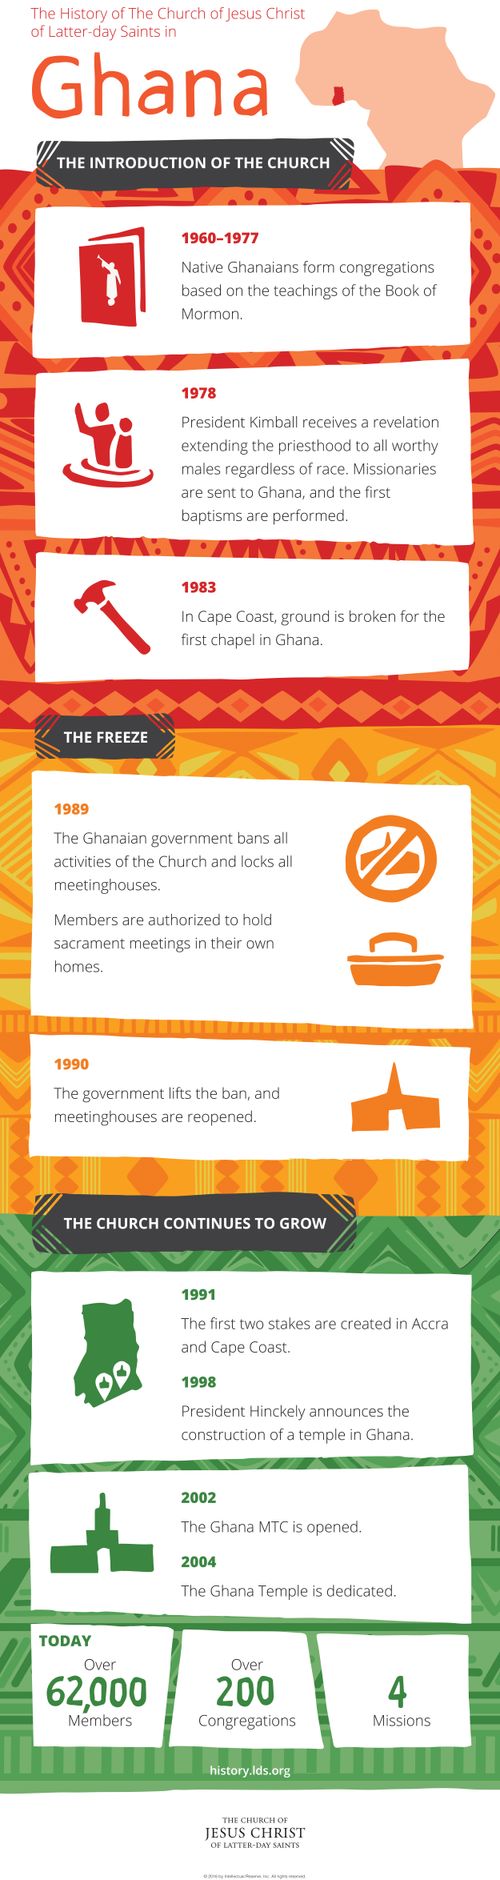 An infographic describing events and data pertaining to The Church of Jesus Christ of Latter-day Saints in Ghana from 1960 until the present day.